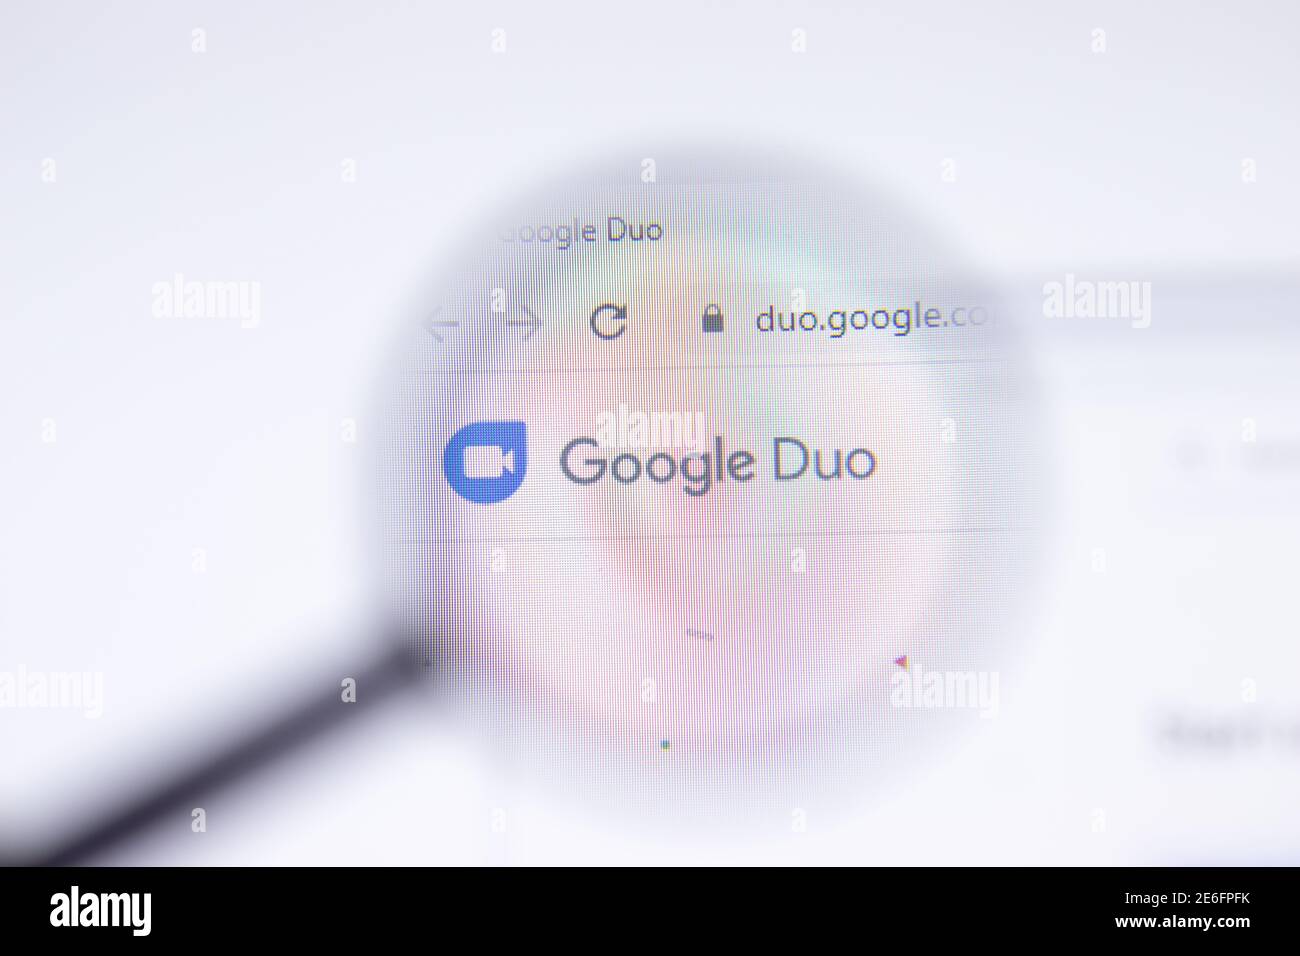 Saint Petersburg, Russia - 28 January 2021: Google Duo website page with logo close-up, Illustrative Editorial Stock Photo